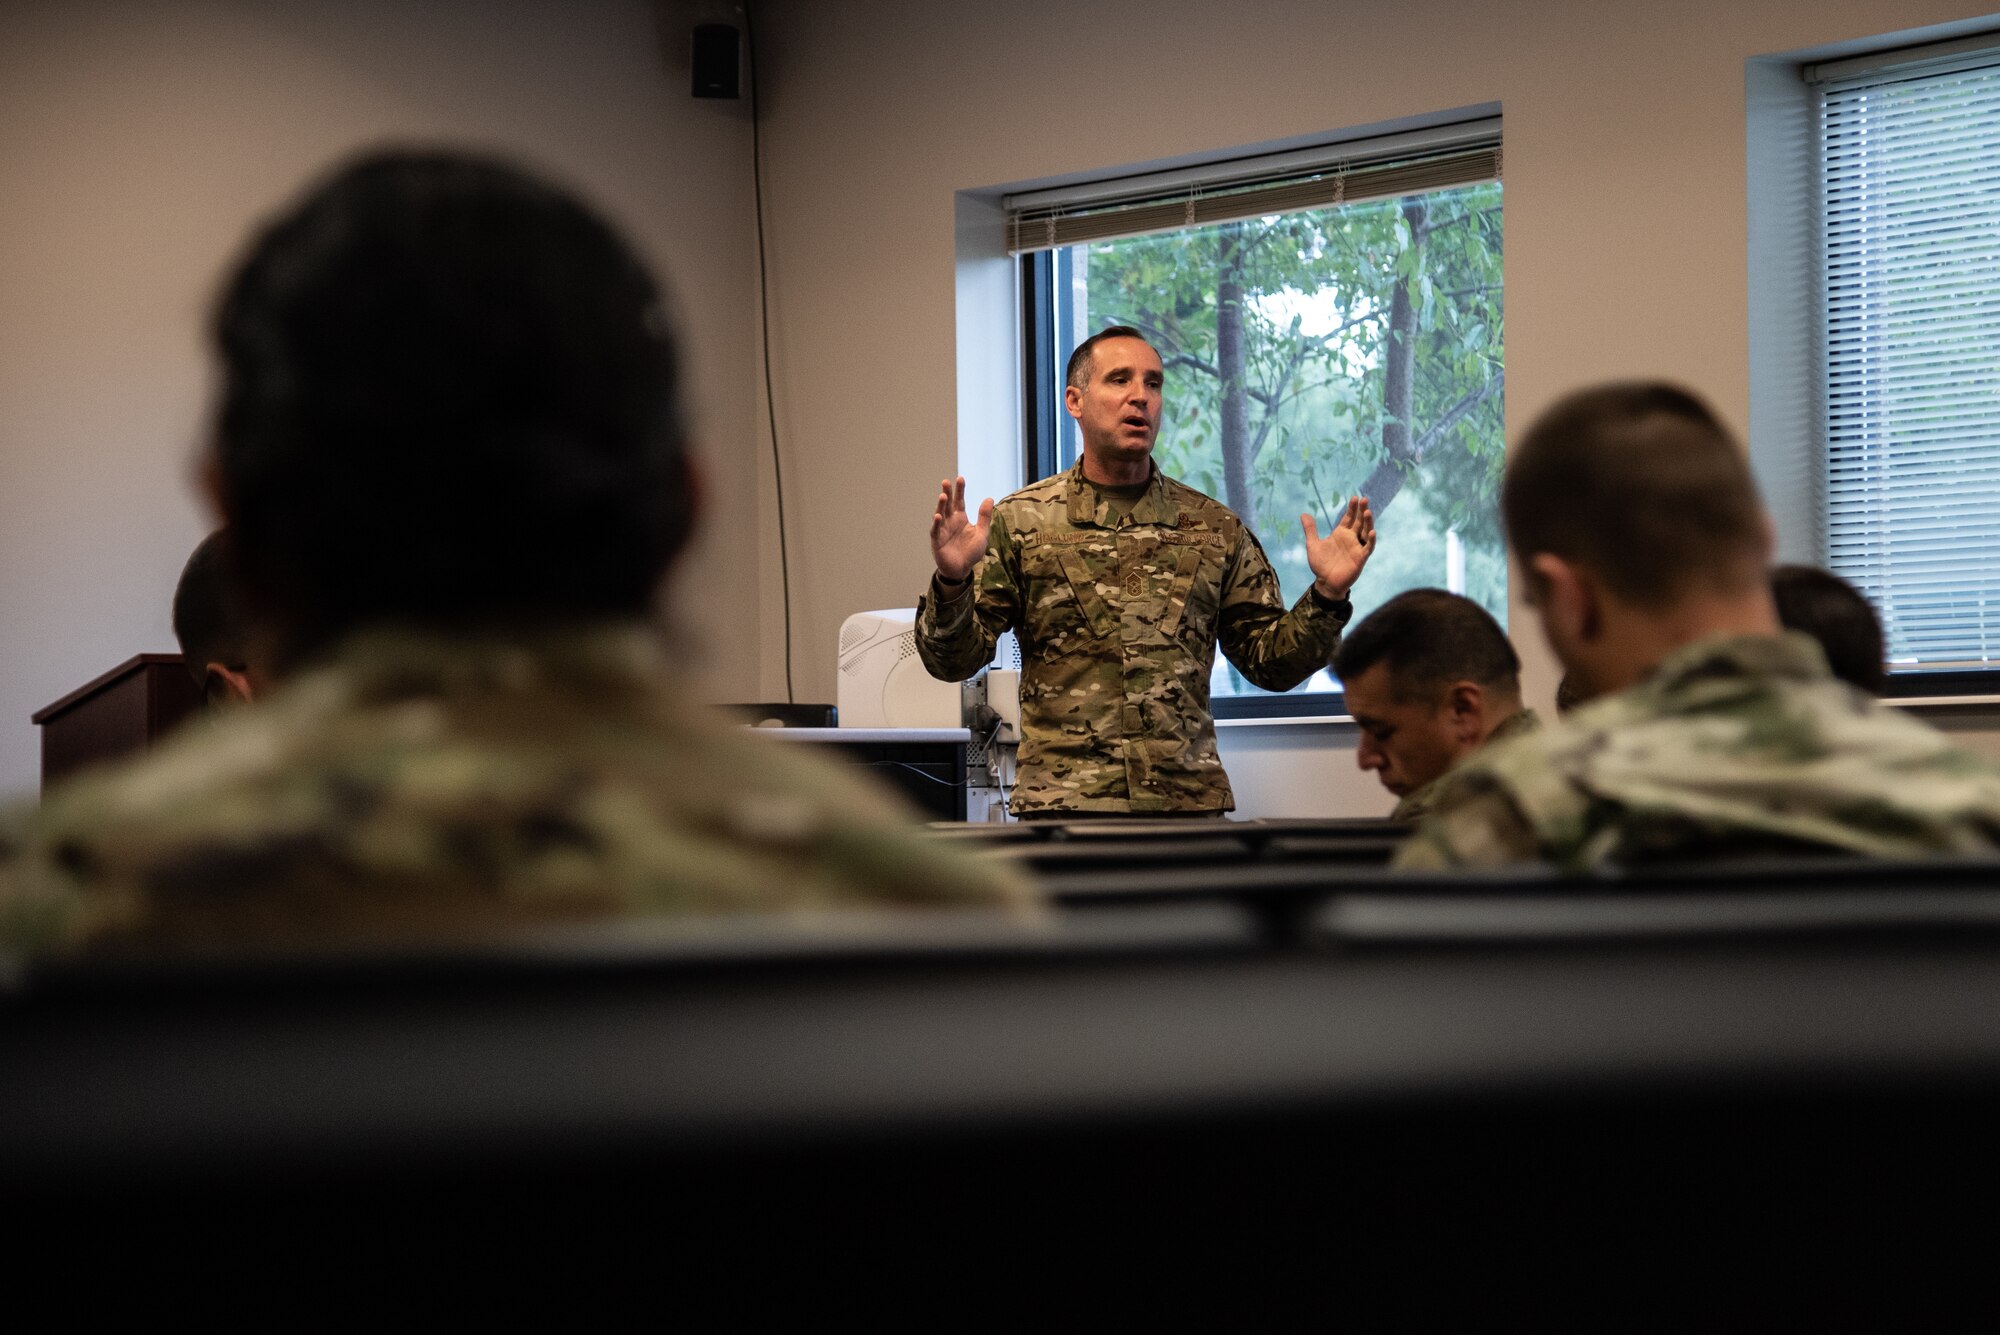 U.S. Air Force Chief Master Sgt. Daniel Hoglund, 20th Fighter Wing command chief, speaks to Airmen attending a superintendent course at Shaw Air Force Base, S.C., Nov. 1, 2018.